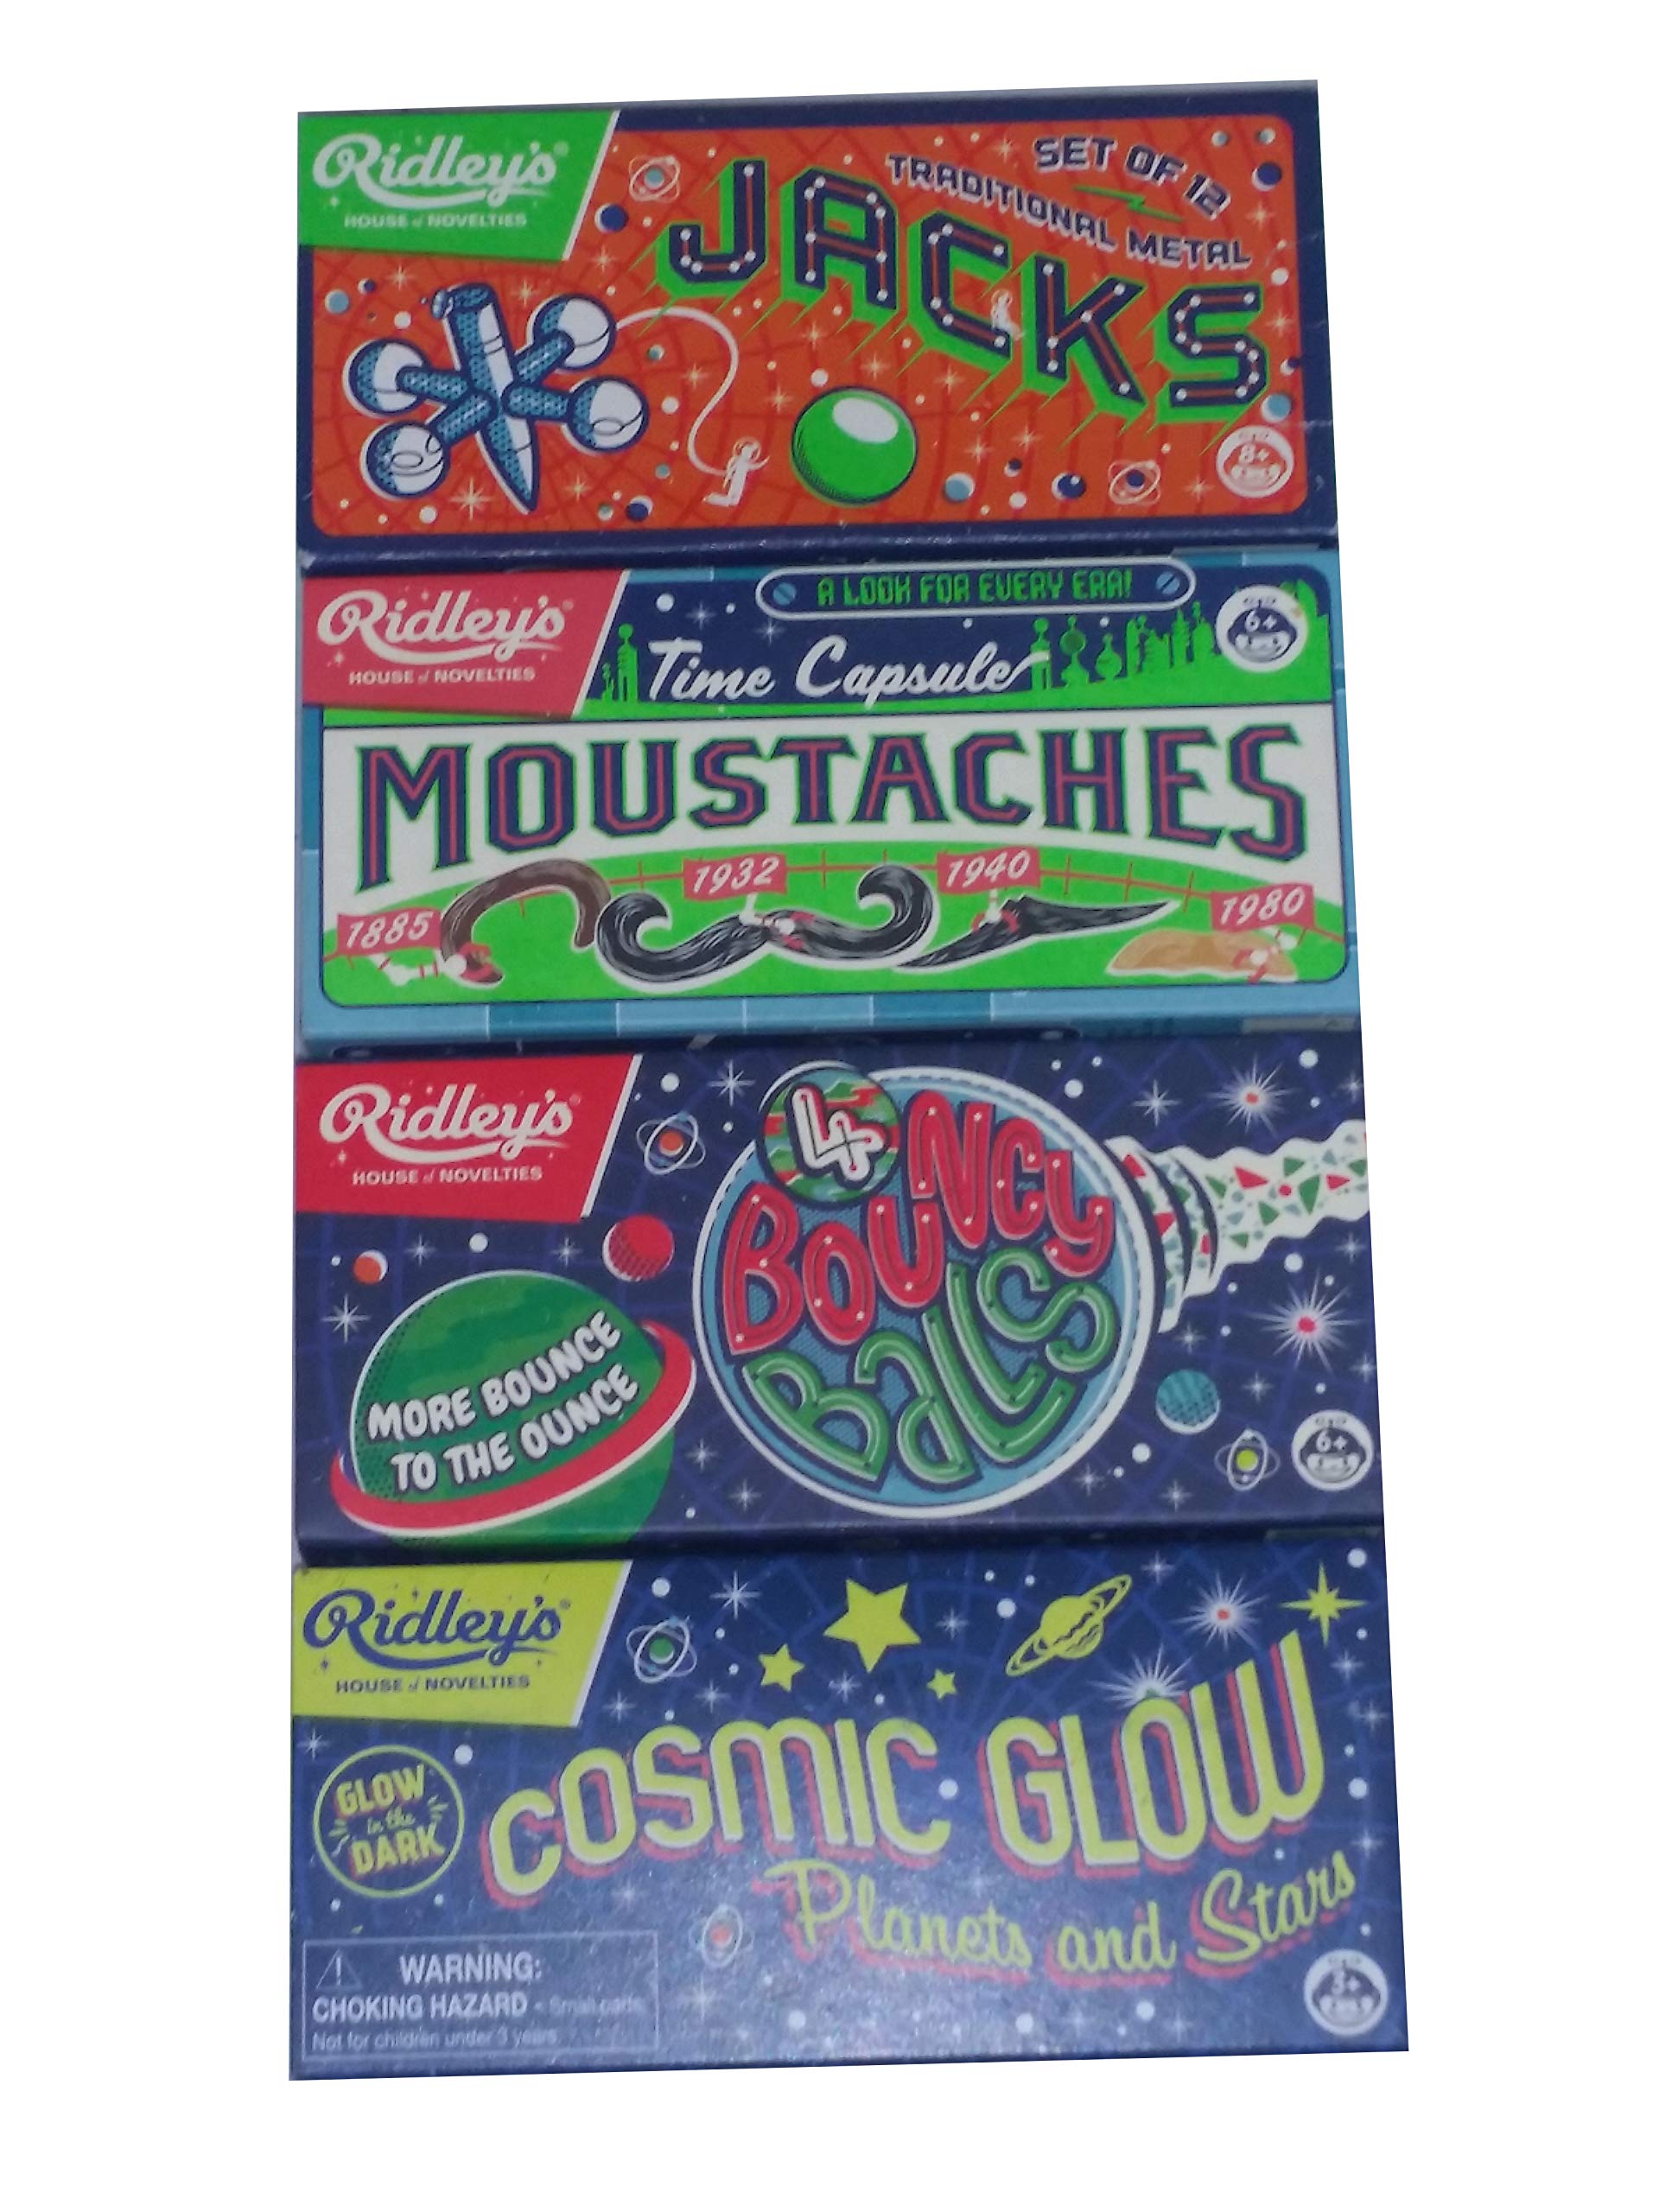 Ridley's Lot 4 Games Jacks, Moustaches, Bouncy Balls and Cosmic Glow